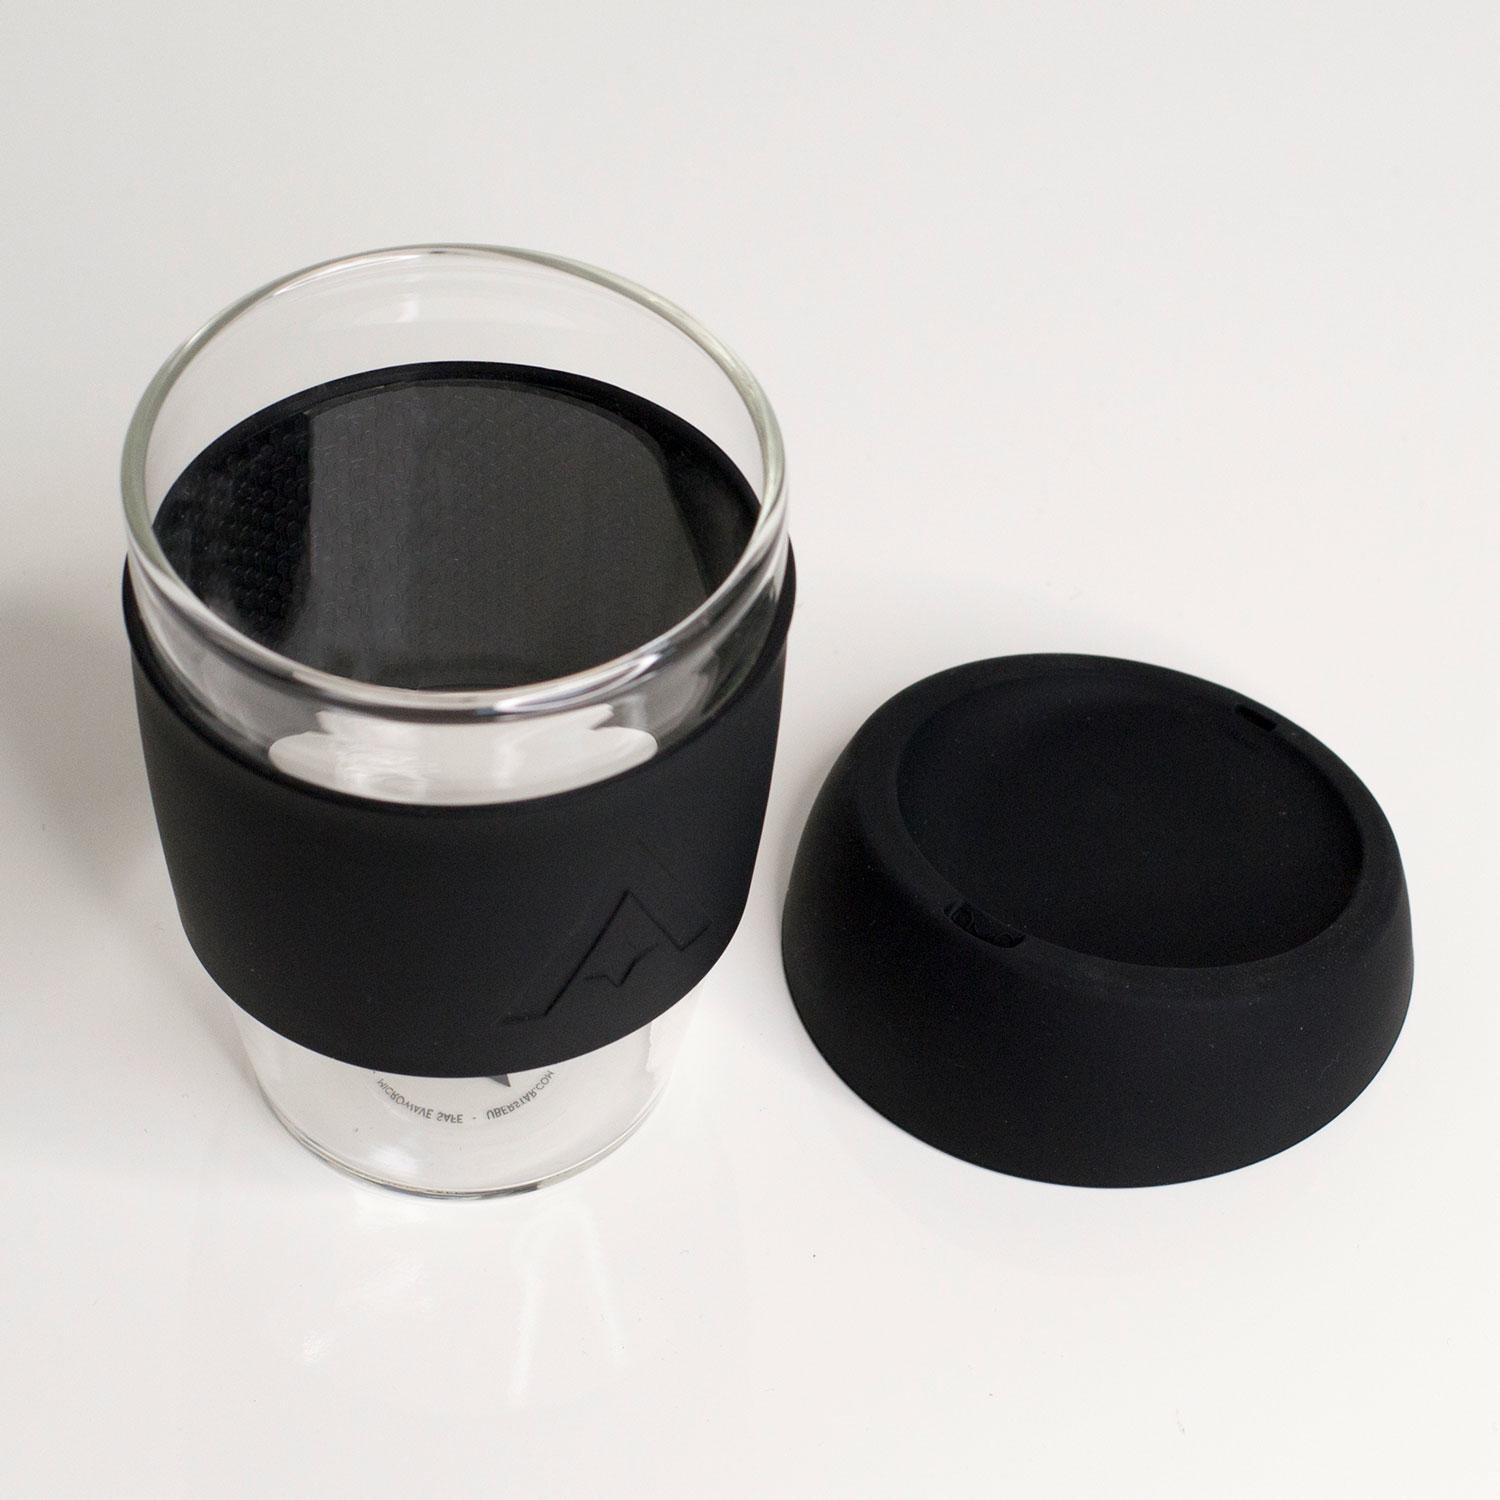 Uberstar Reusable Glass Travel Cup - Black - Only £14.99